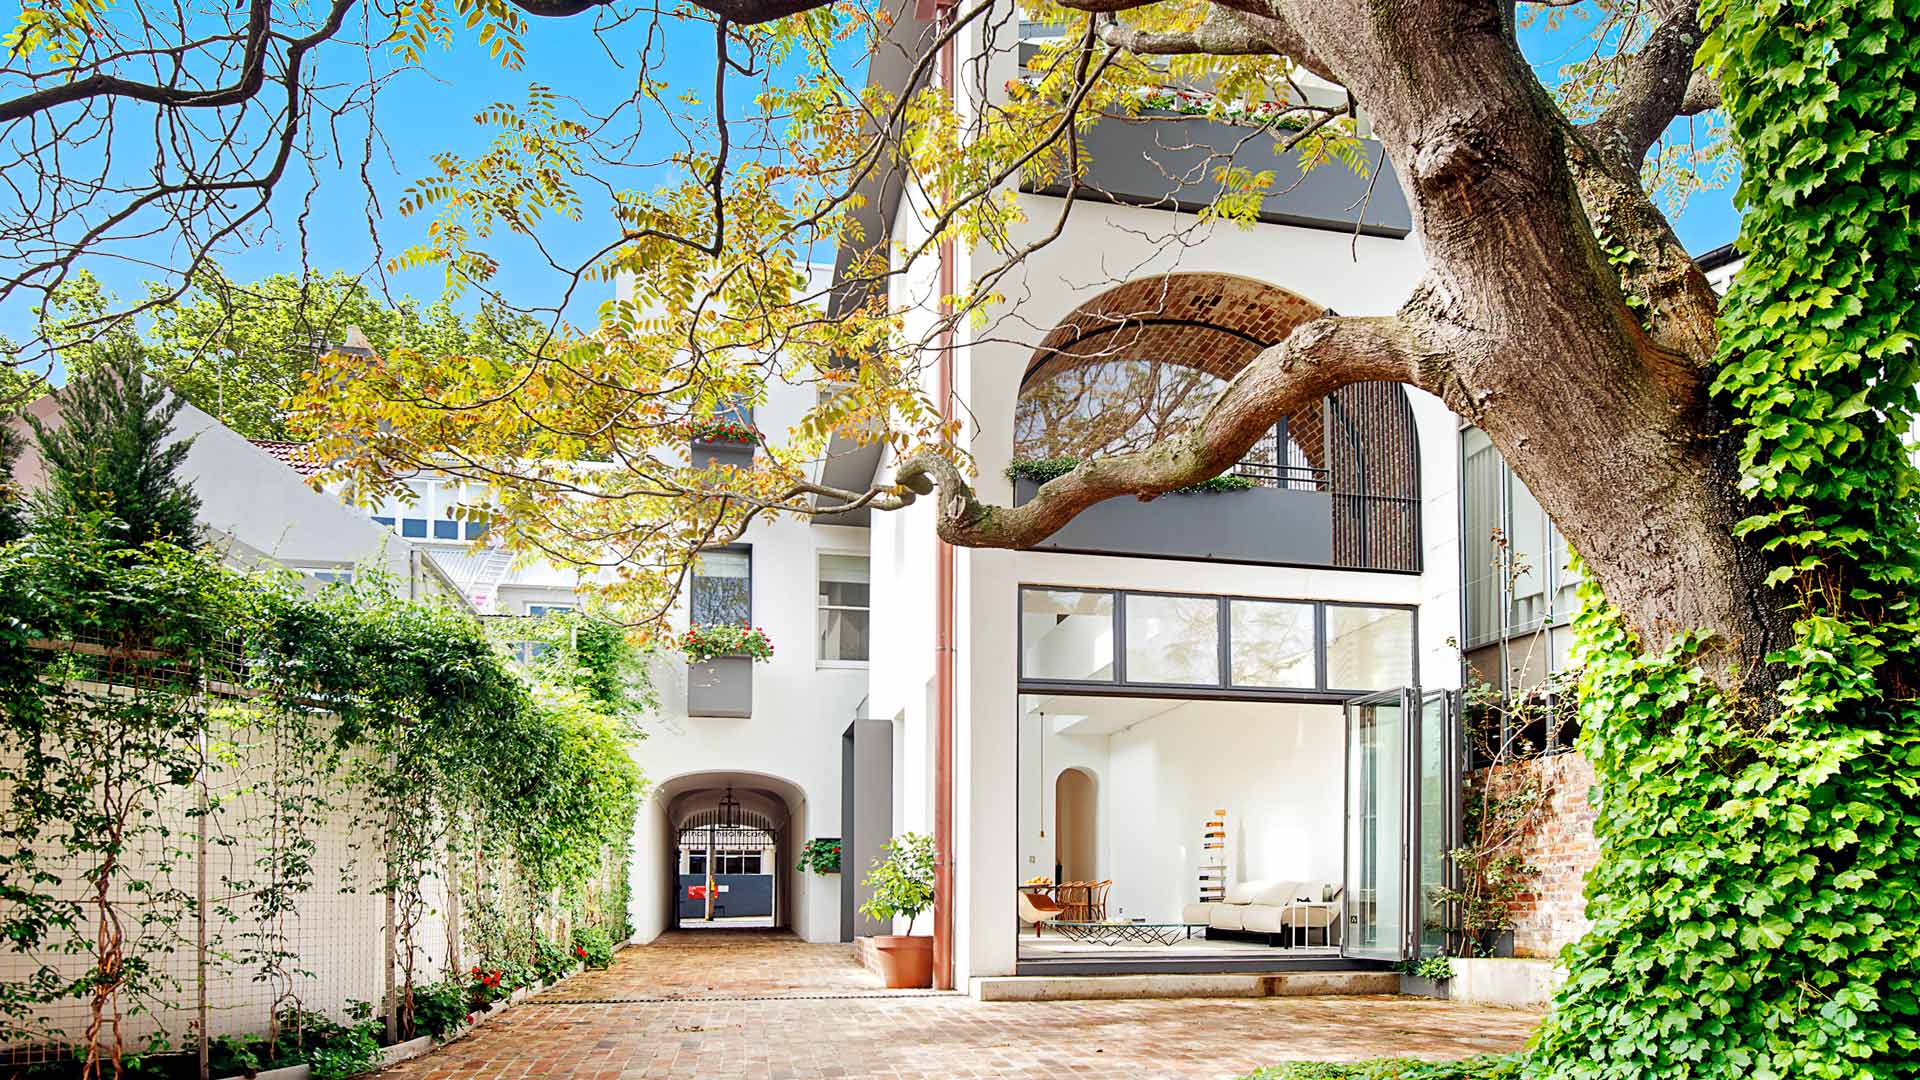 These Three Ridiculously Opulent Houses Are Currently for Sale in Sydney Right Now